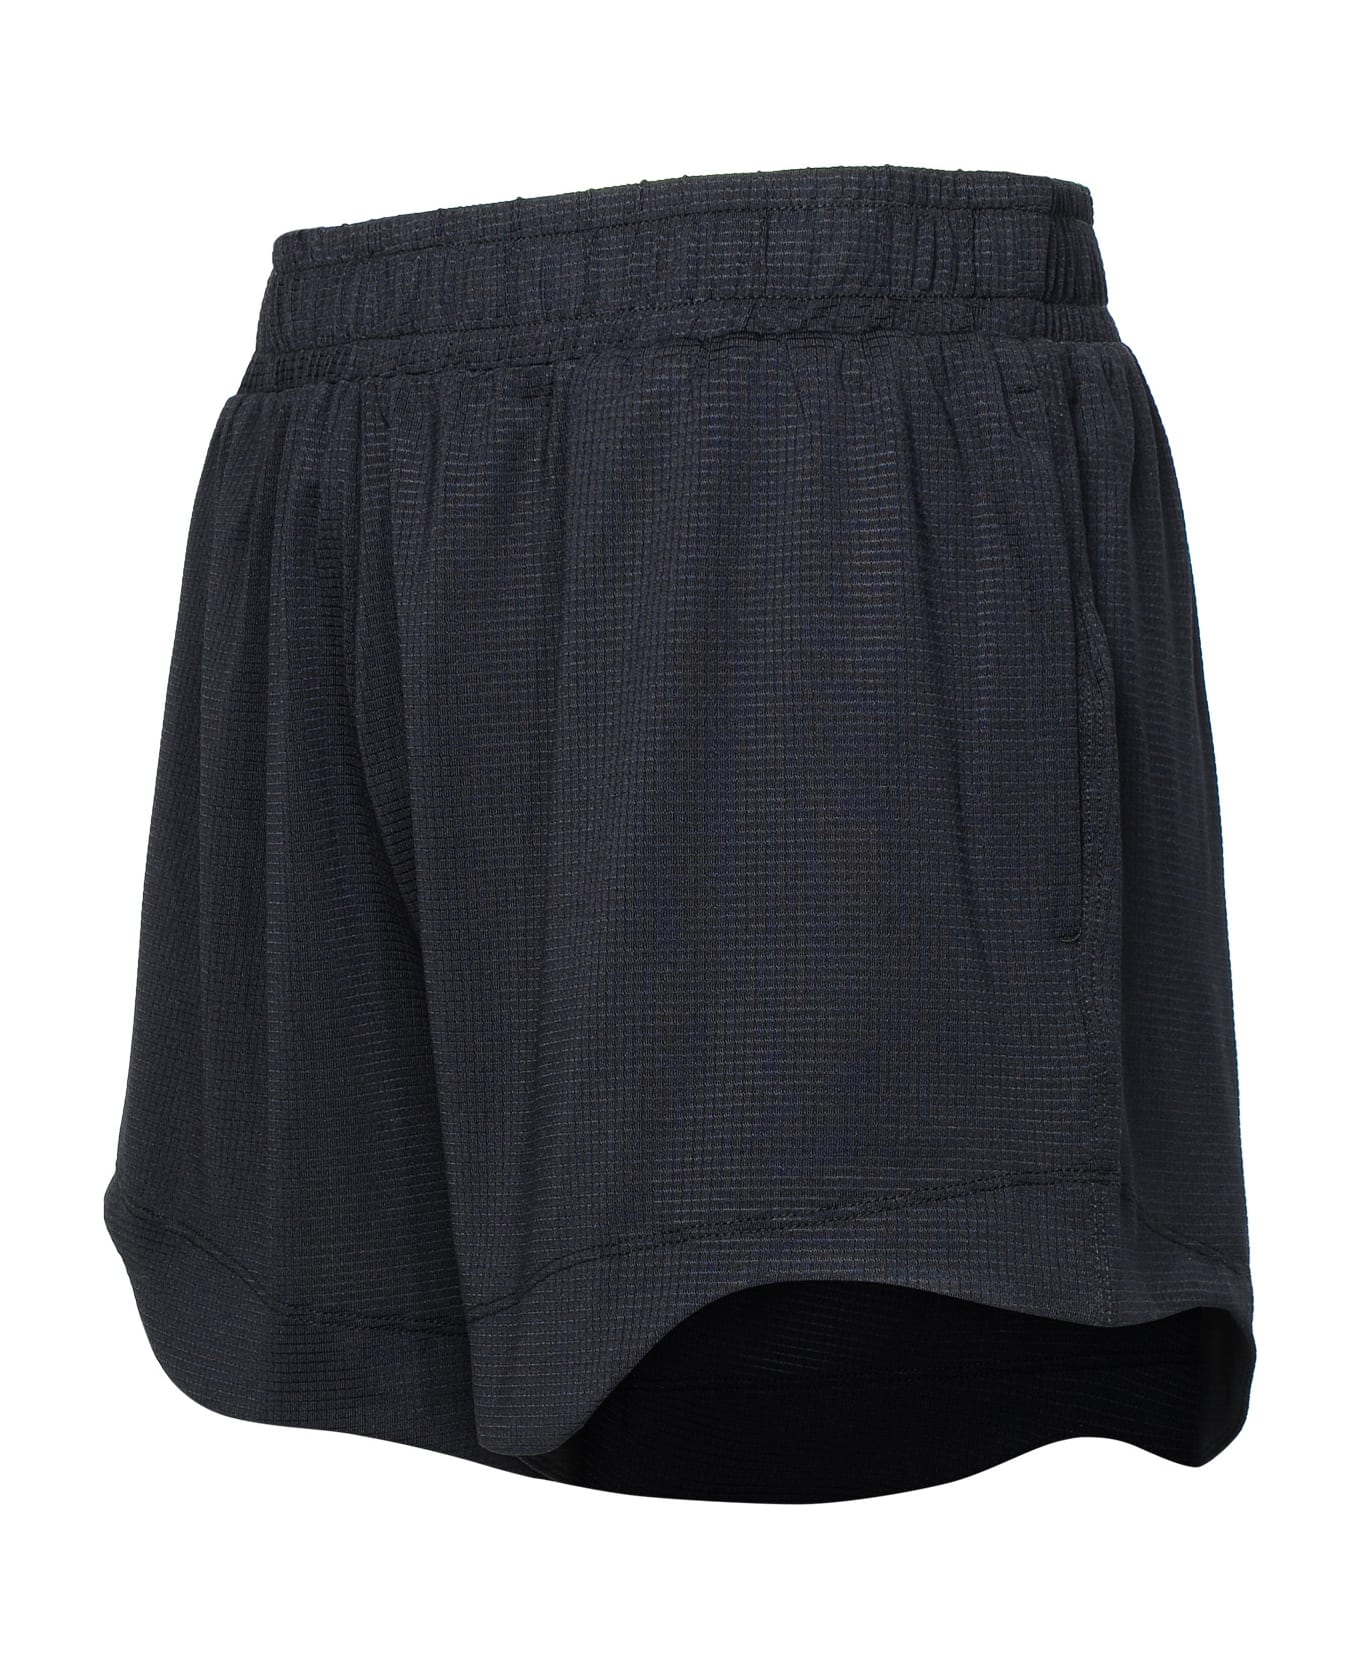 Ganni 'active' Shorts In Black Recycled Polyester Blend - Black ショートパンツ